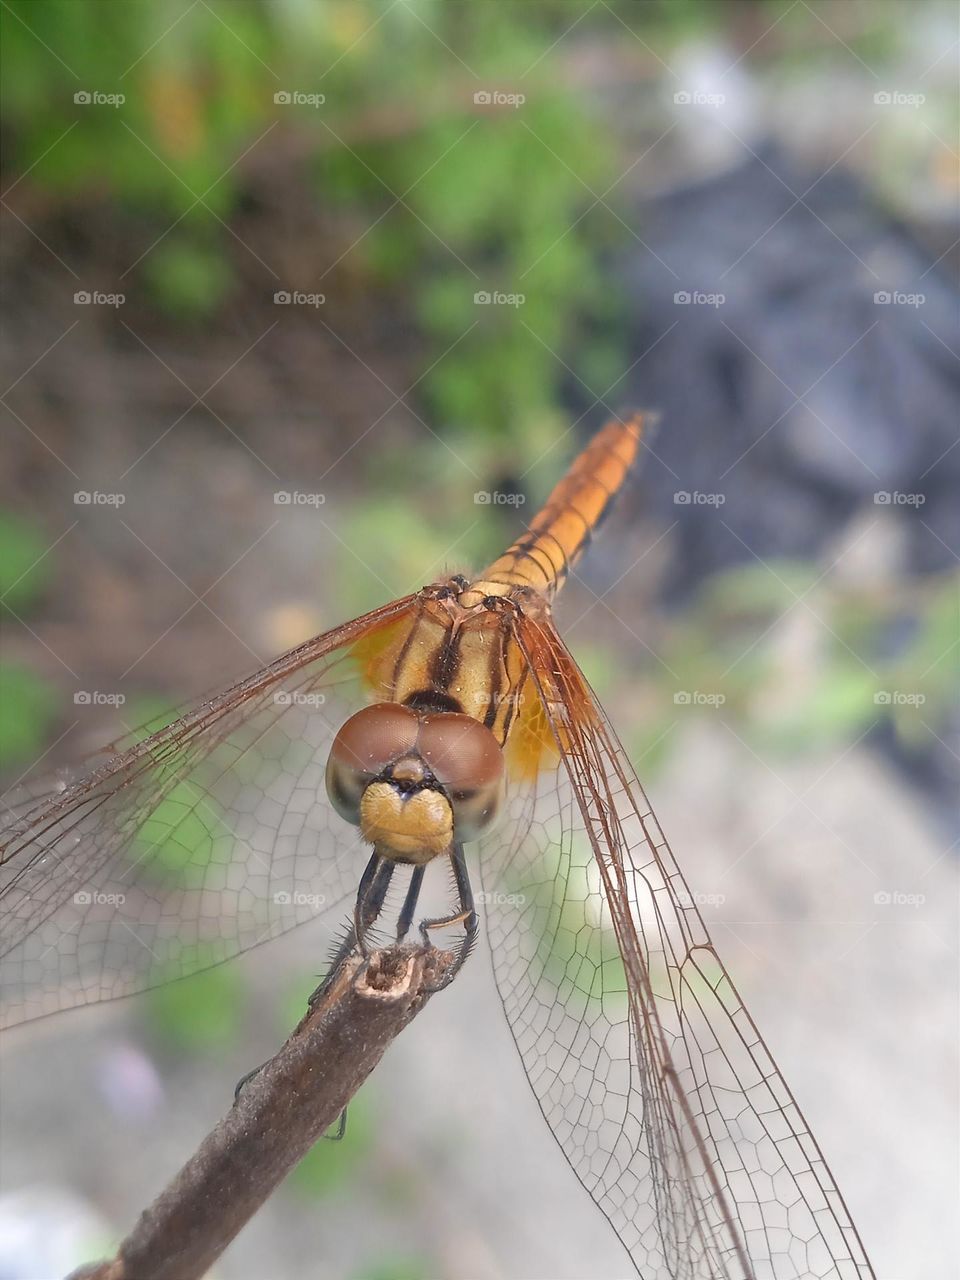 Dragonfly in the wind.